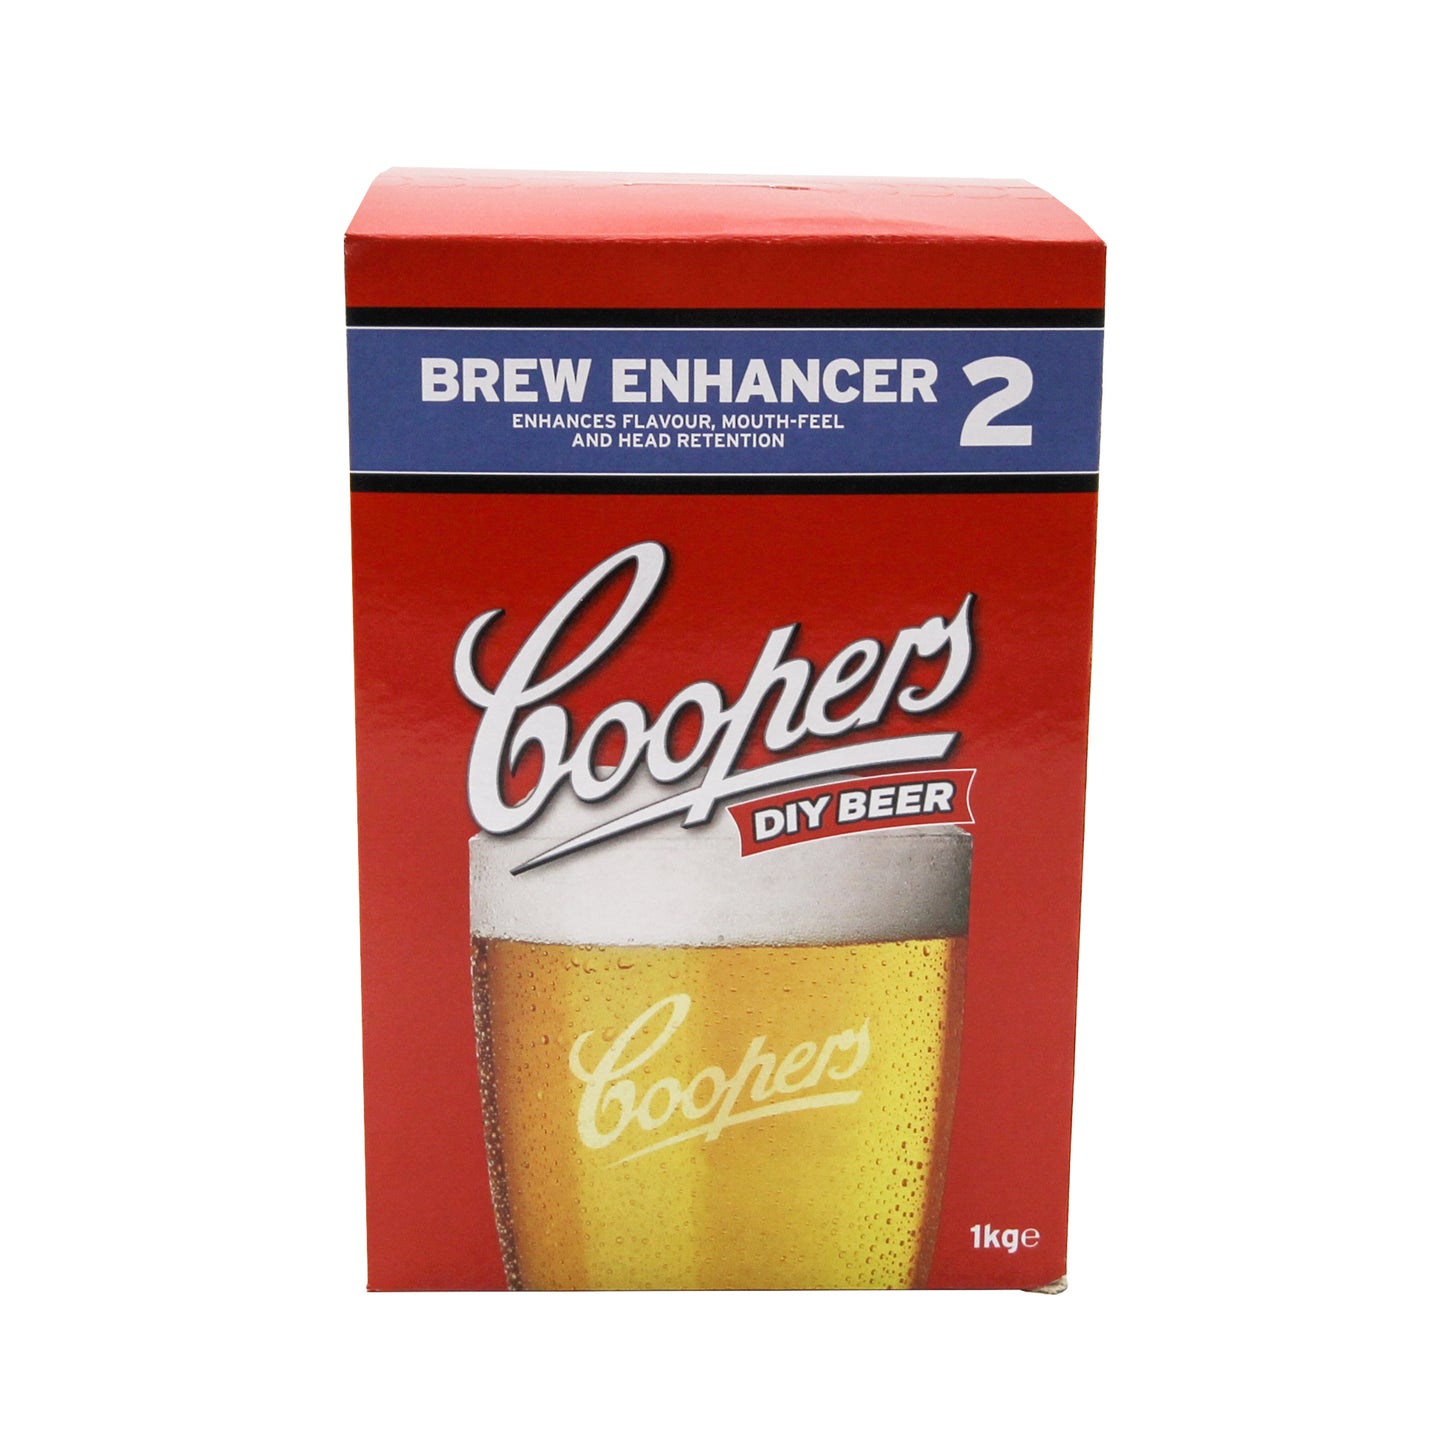 1kg box of Coopers brew enhancer number two